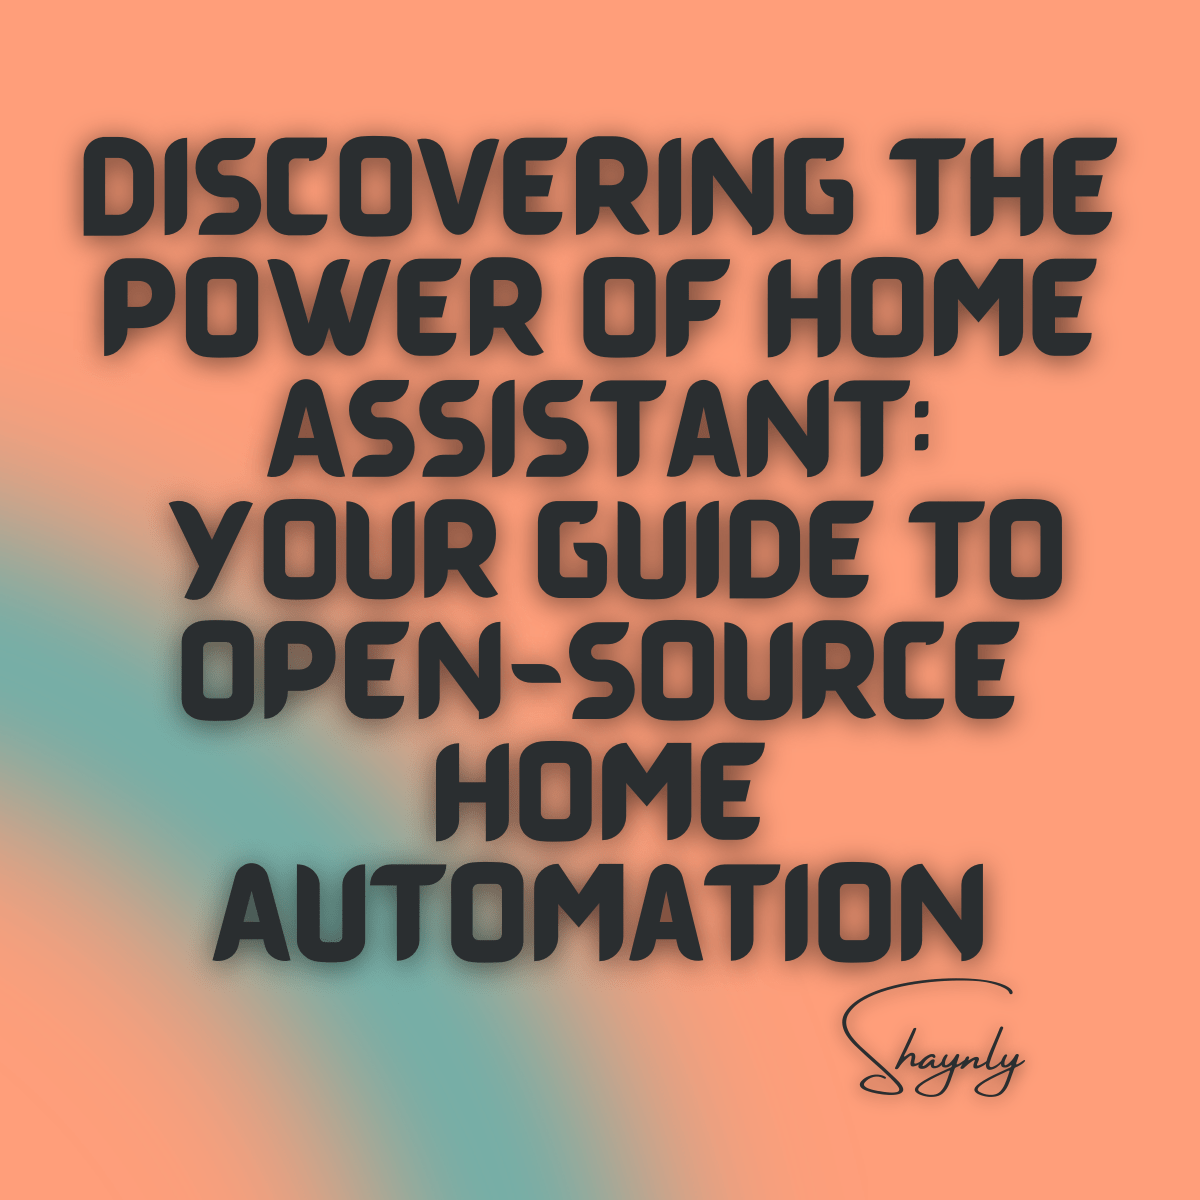 Open-Source Home Automation